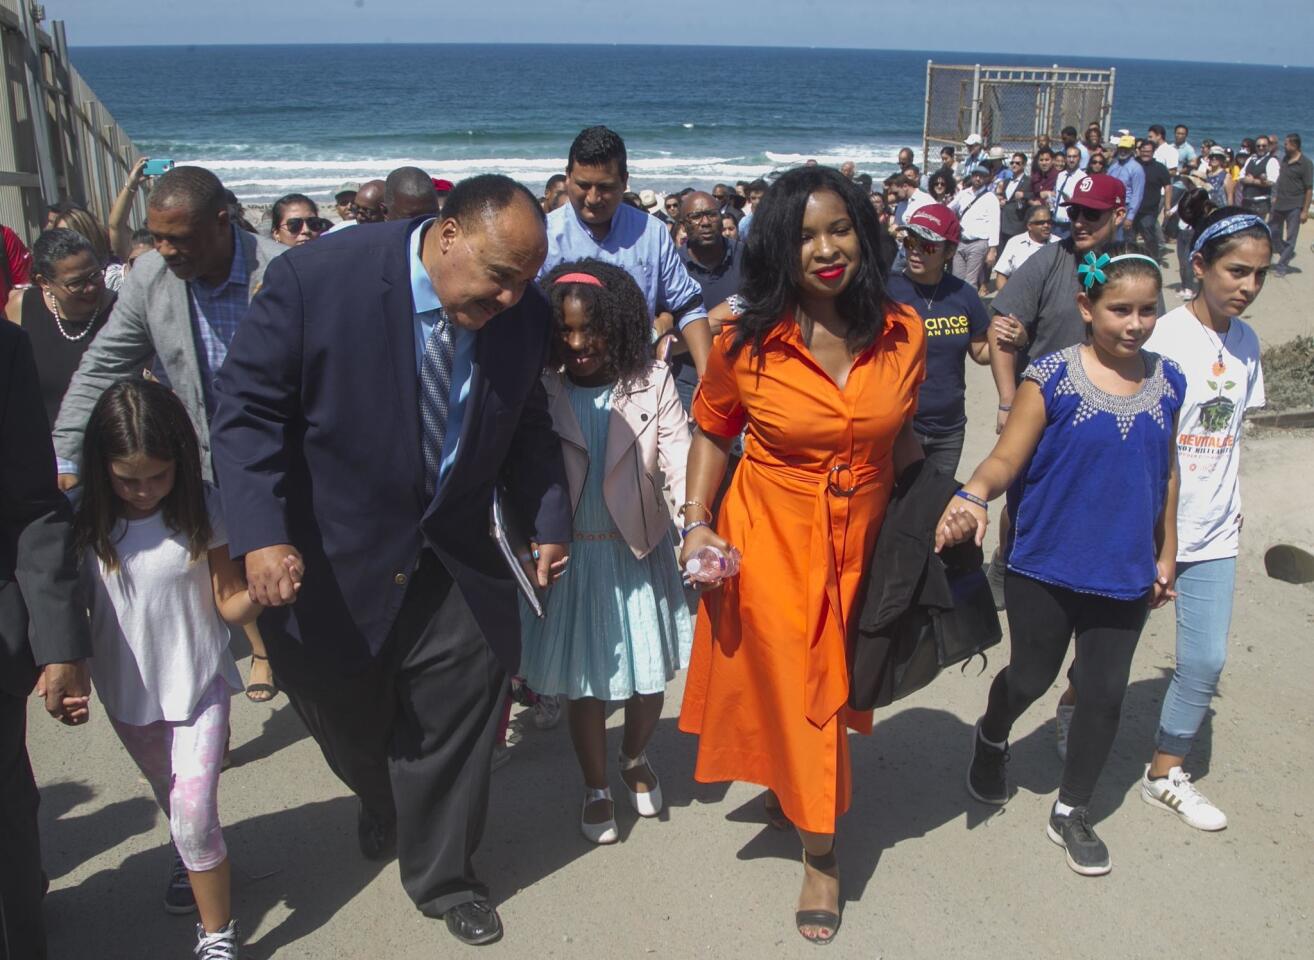 Martin Luther King III, striped tie, his wife Arndrea Waters King, in orange dress, and their daughter Yolanda Renee King, between them, led a group of people from the beach to Border Field State Park where King gave a speech, to commemorate the 55th anniversary of his father's "I Have a Dream" speech 55 years ago. He spoke out strongly denounced the dehumanizing treatment of immigrants and their families along the border region. PHOTO/JOHN GIBBINS Staff photographer, San Diego Union-Tribune. ©2018